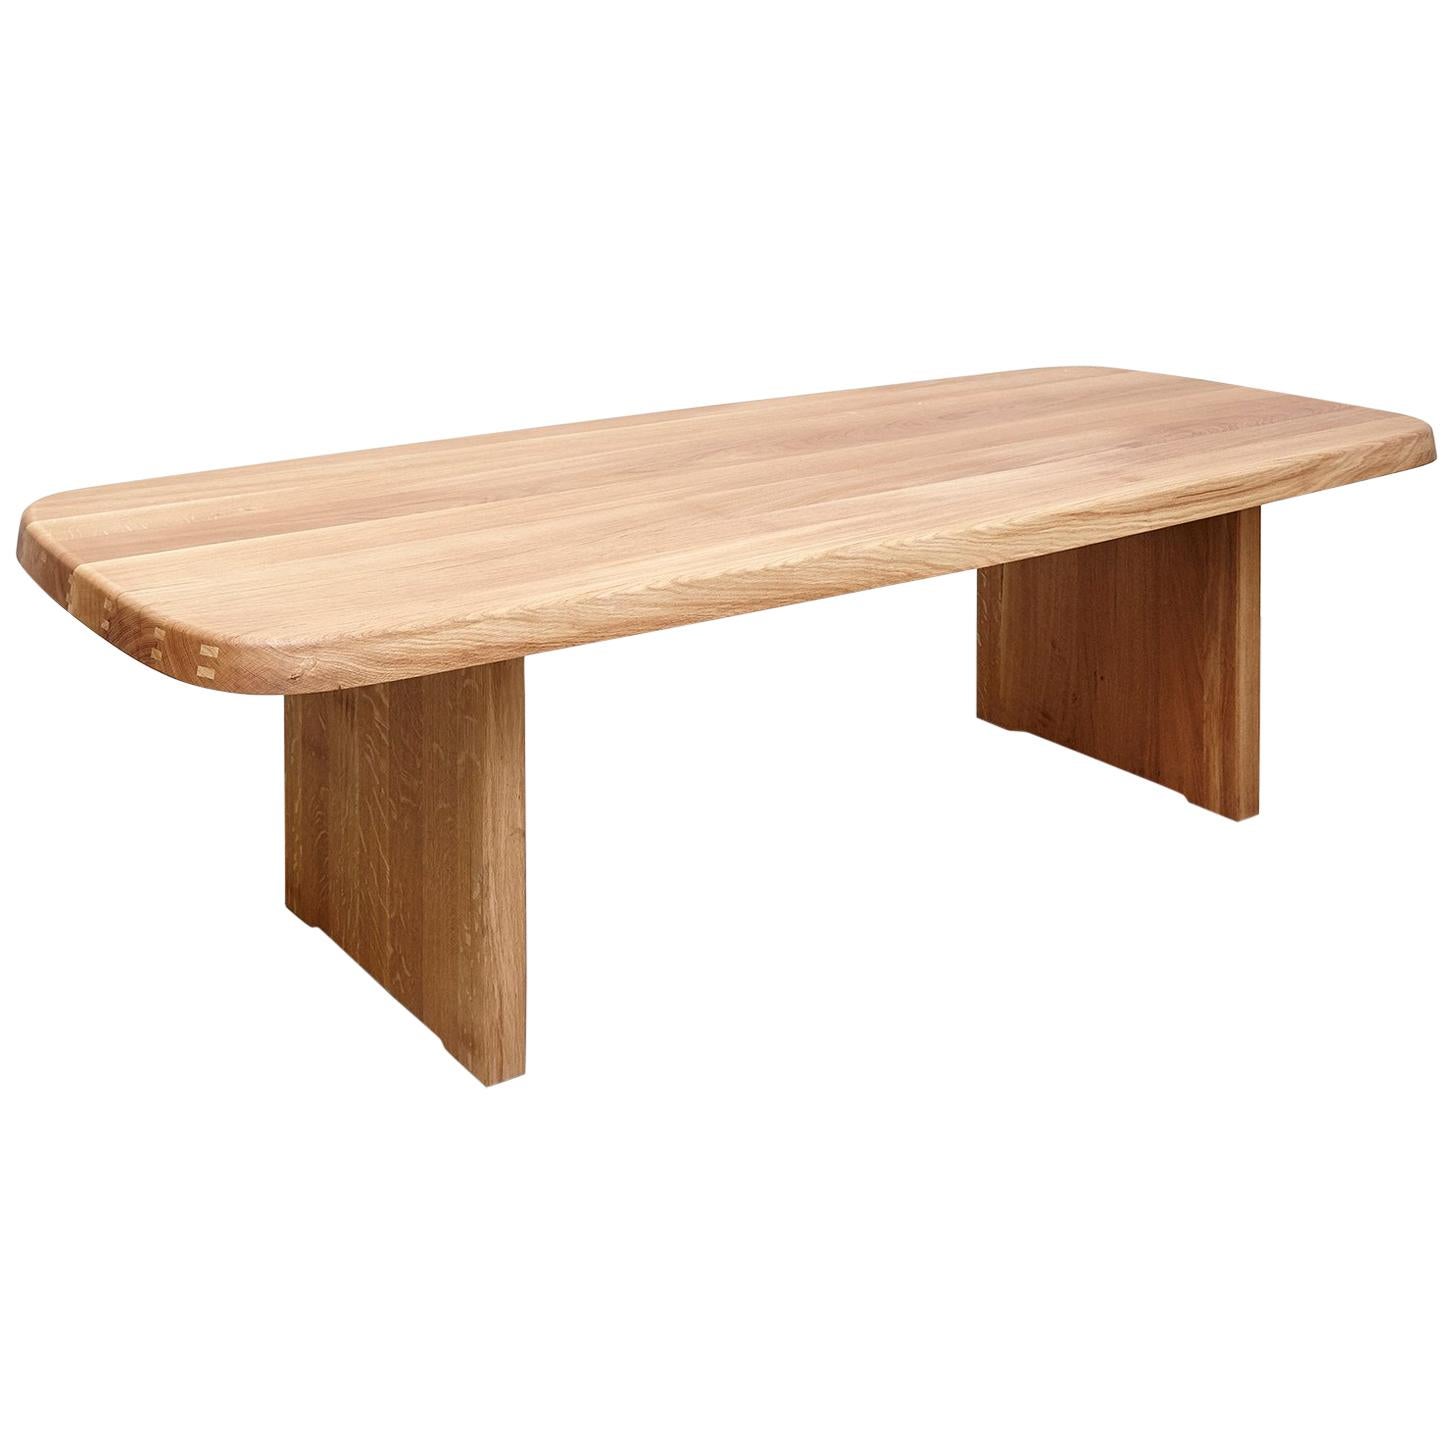 Pierre Chapo Mid Century Modern T20A Wood French Dining Table 